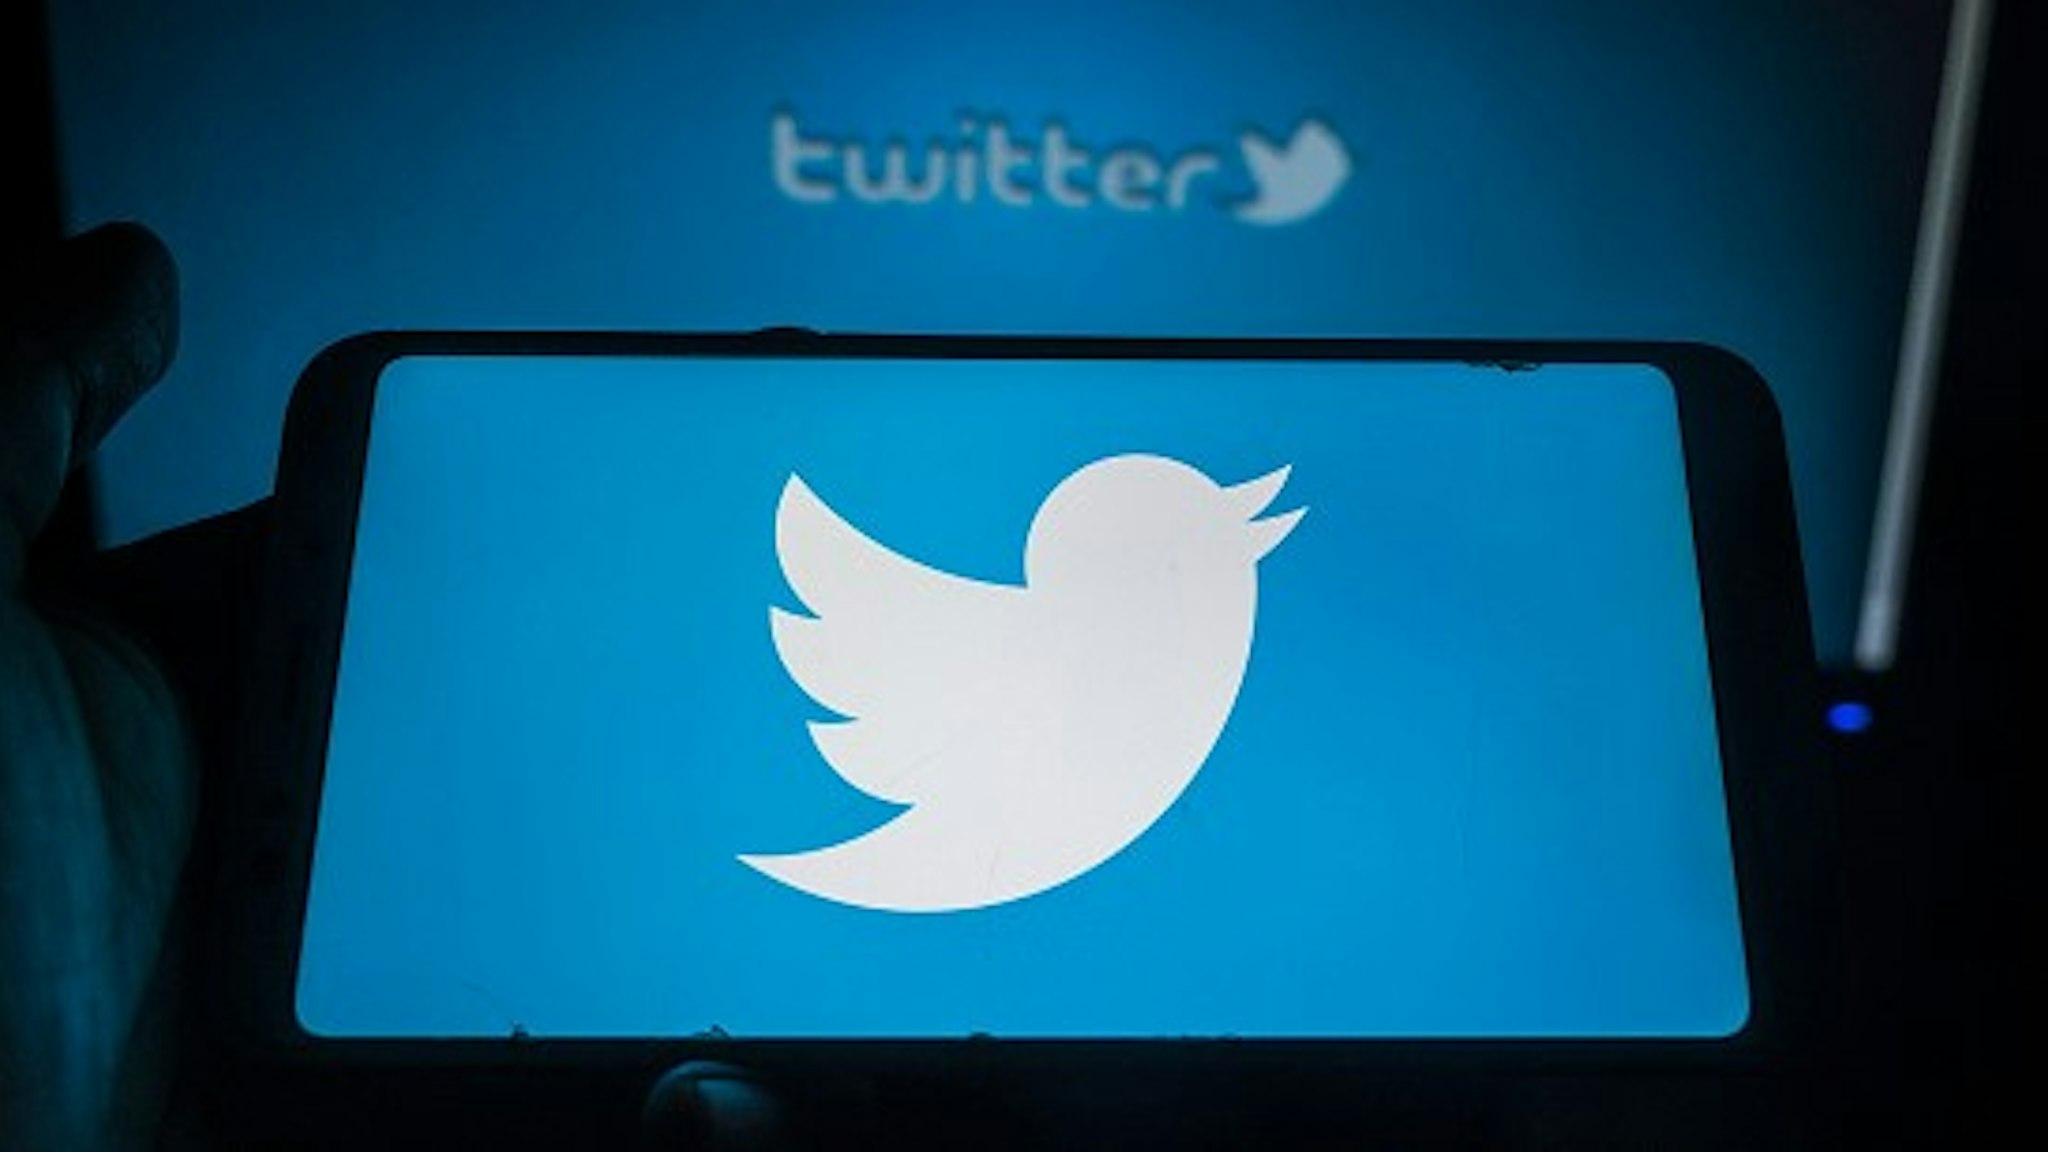 Twitter logo displayed on a phone screen in Tehatta, Nadia, West Bengal, India on June 16, 2020. Twitter is launching two new features: The ability to save a tweet as a draft, as well as the ability to schedule a tweet to send at a specific time. (Photo Illustation by